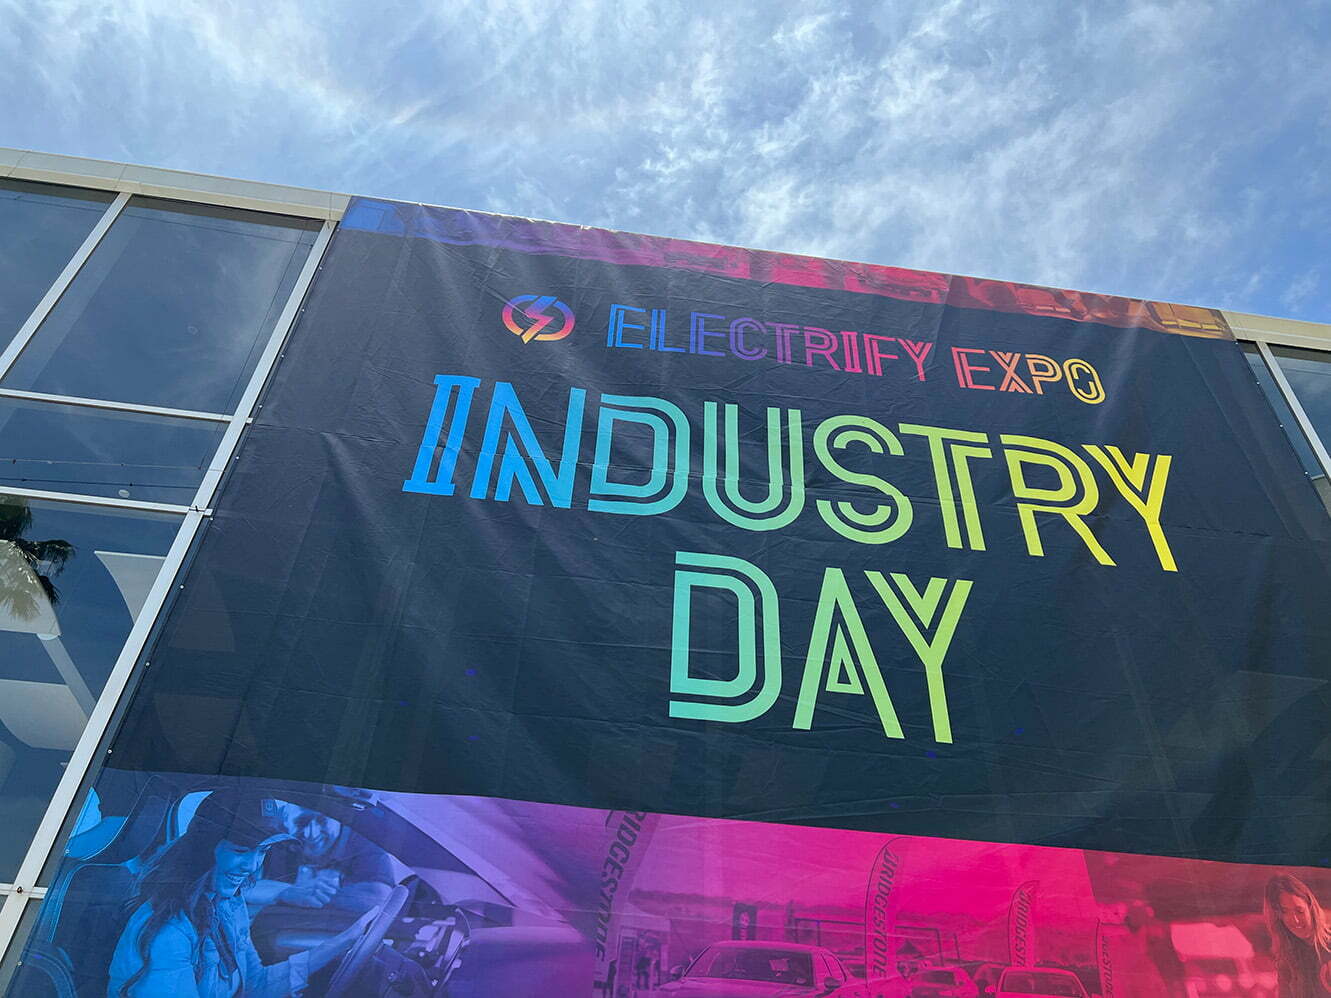 Industry Day at Electrify Expo (Julie Nguyen/SNAP TASTE)